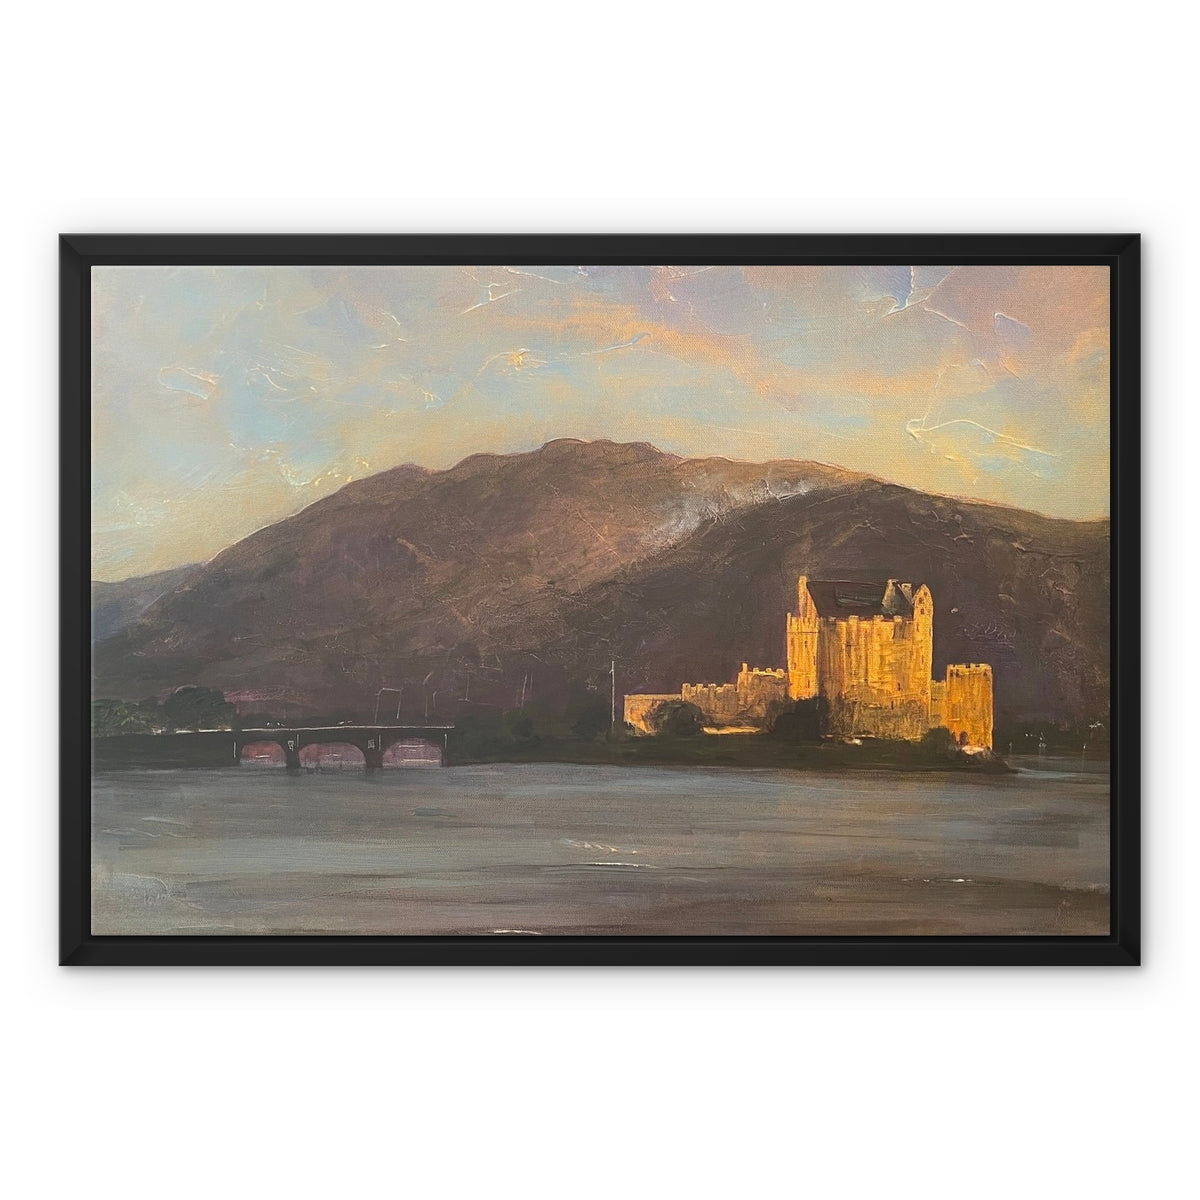 Eilean Donan Castle Painting | Framed Canvas From Scotland-Floating Framed Canvas Prints-Historic & Iconic Scotland Art Gallery-24"x18"-Paintings, Prints, Homeware, Art Gifts From Scotland By Scottish Artist Kevin Hunter